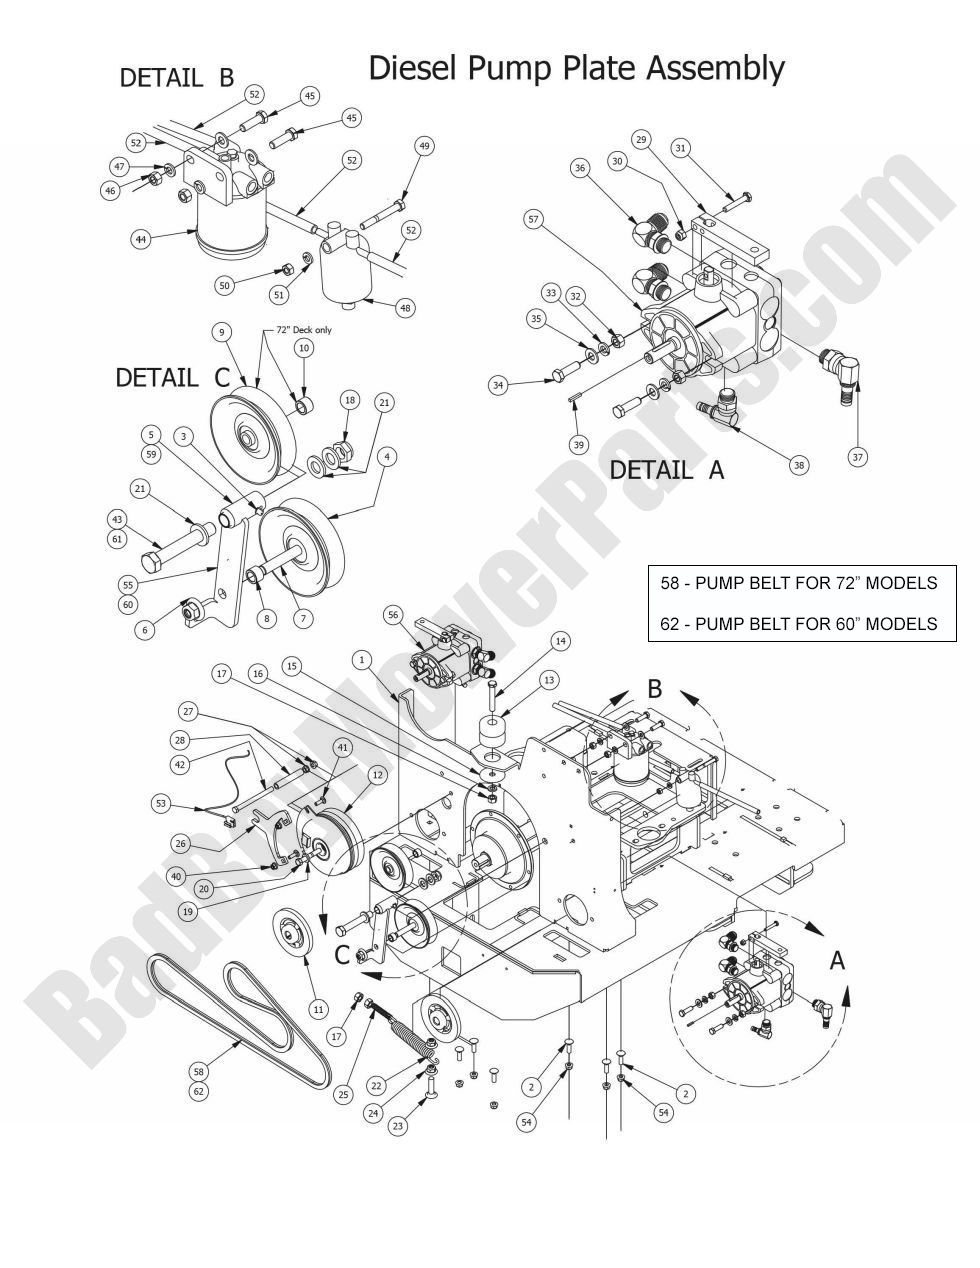 2015 Diesels Pump Plate Assembly